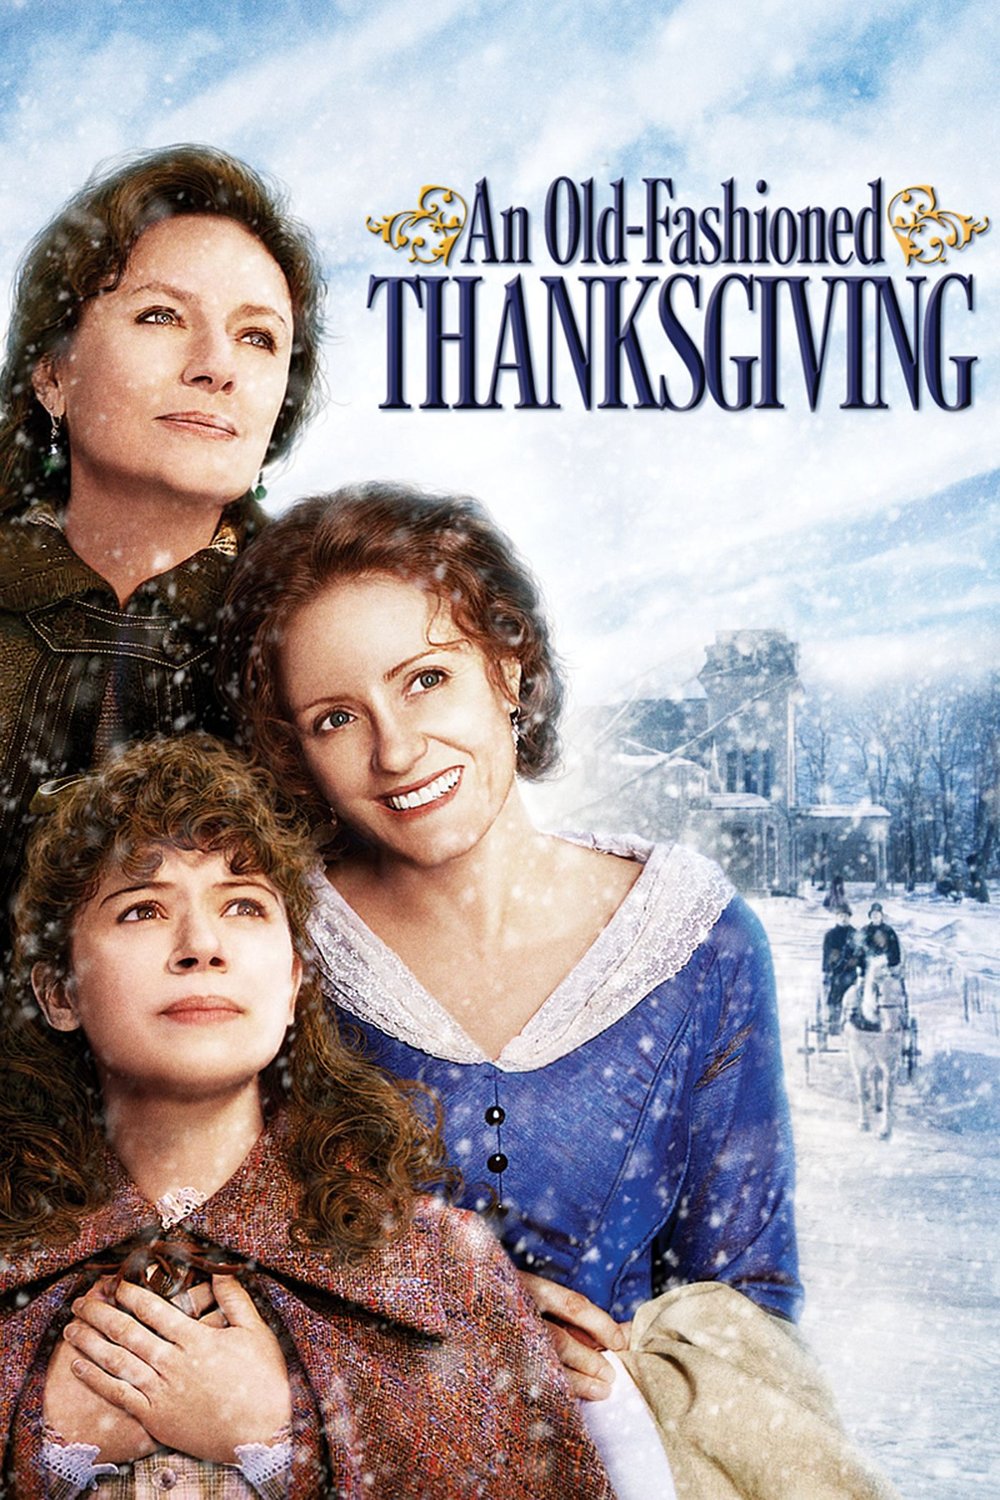 Poster of the movie An Old Fashioned Thanksgiving